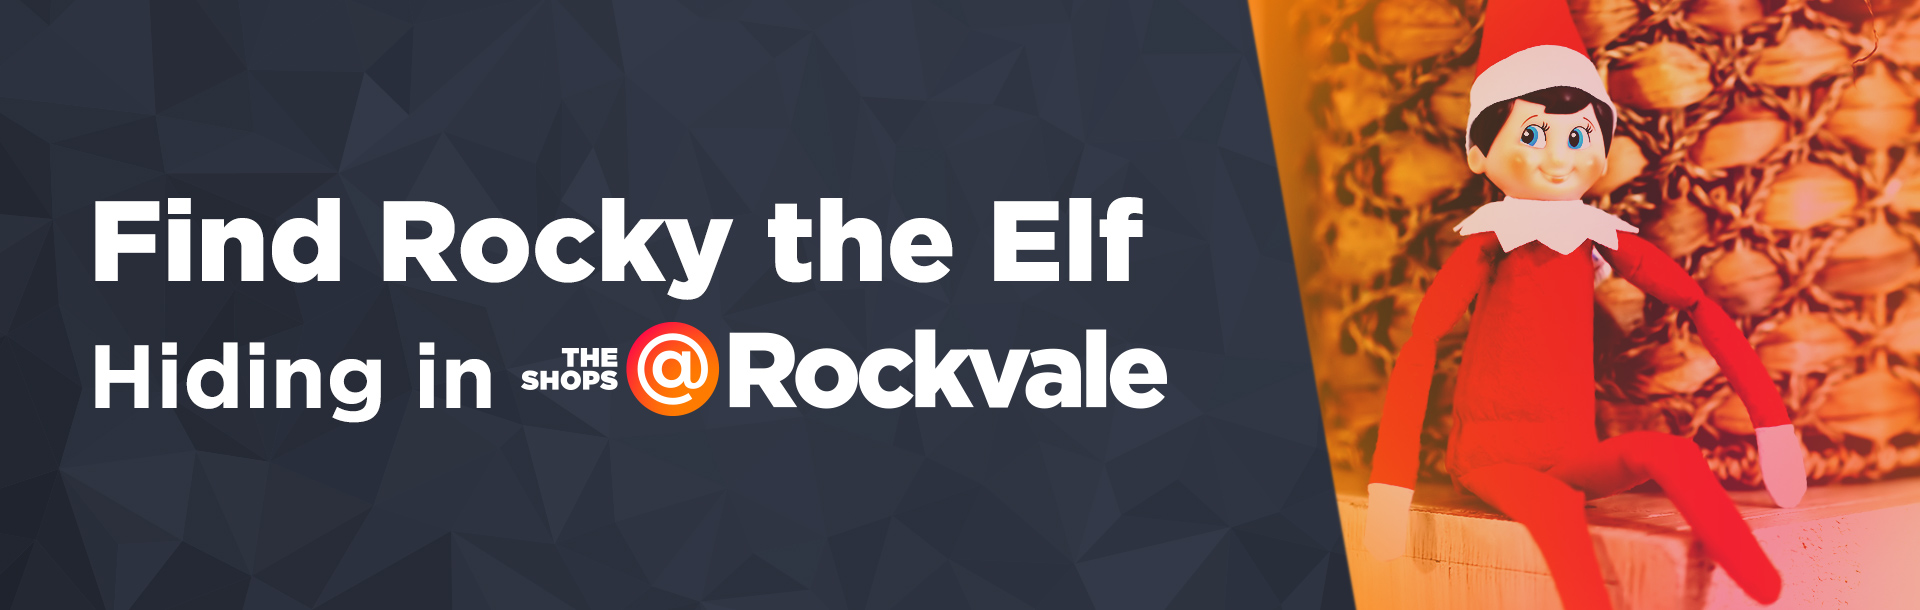 Find Rocky the Elf Hiding in the Shops @ Rockvale